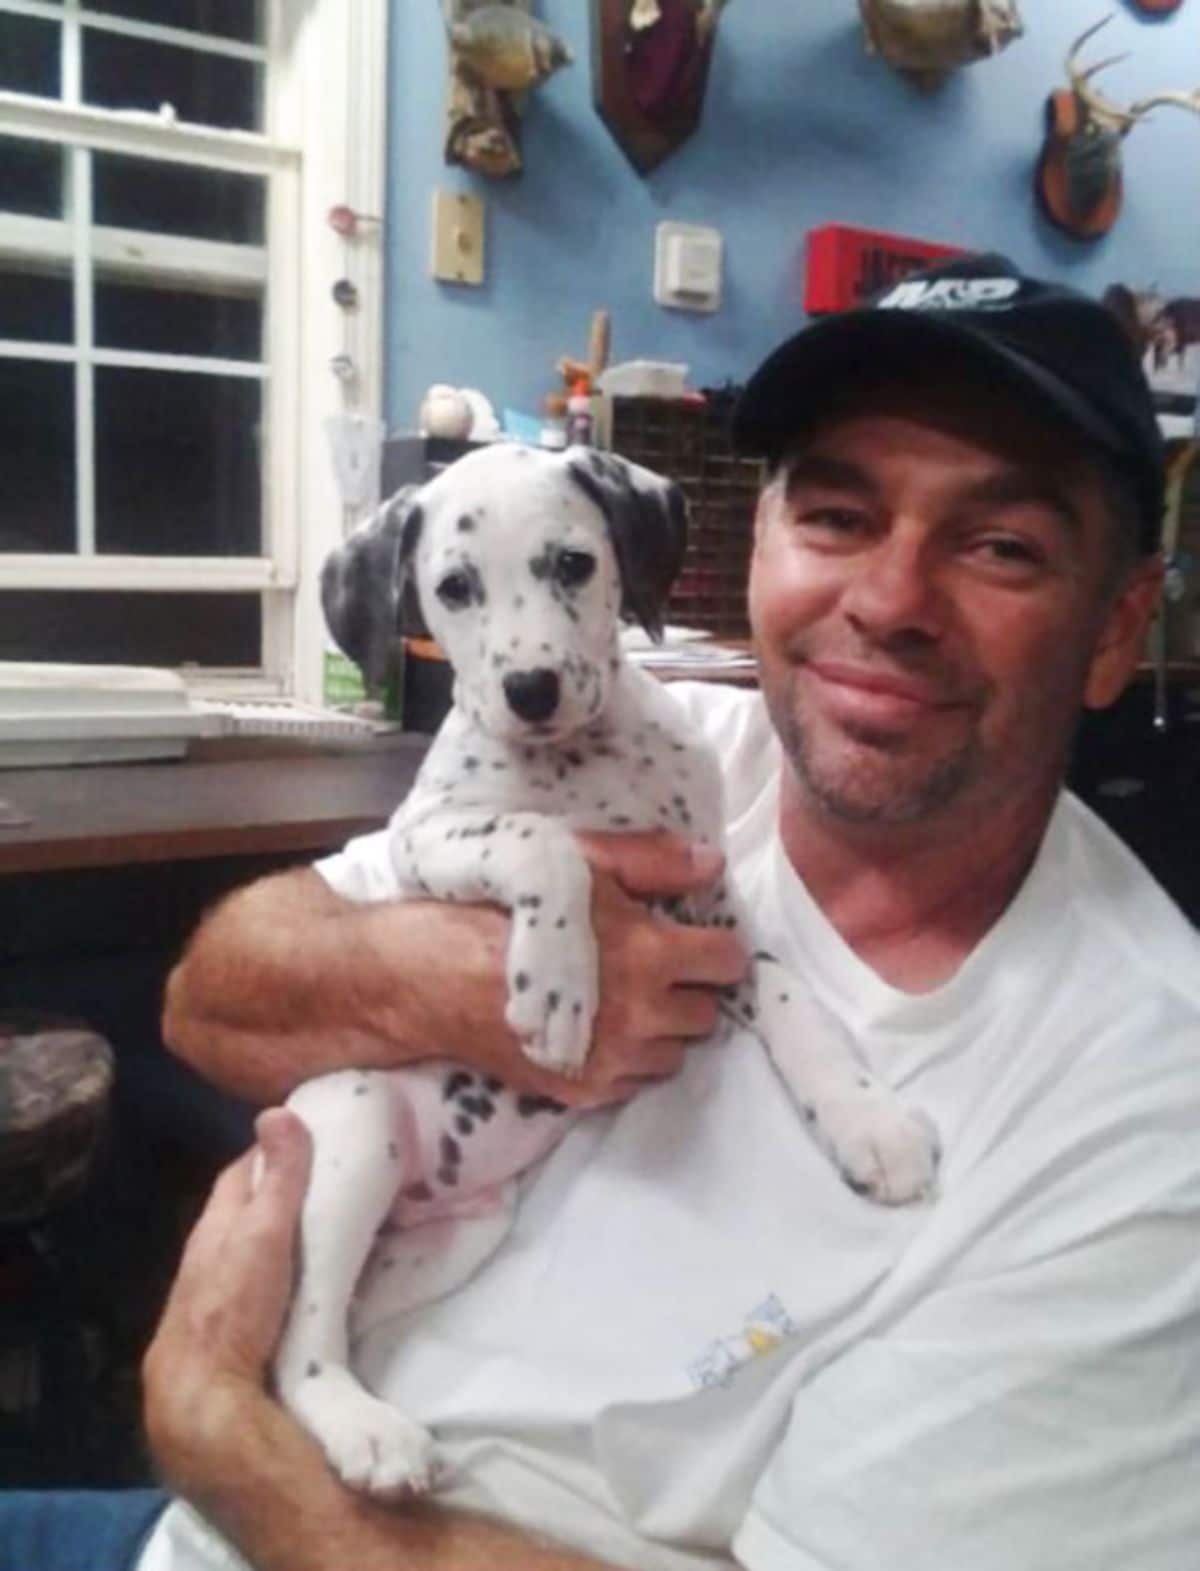 dalmation puppy being held by a man